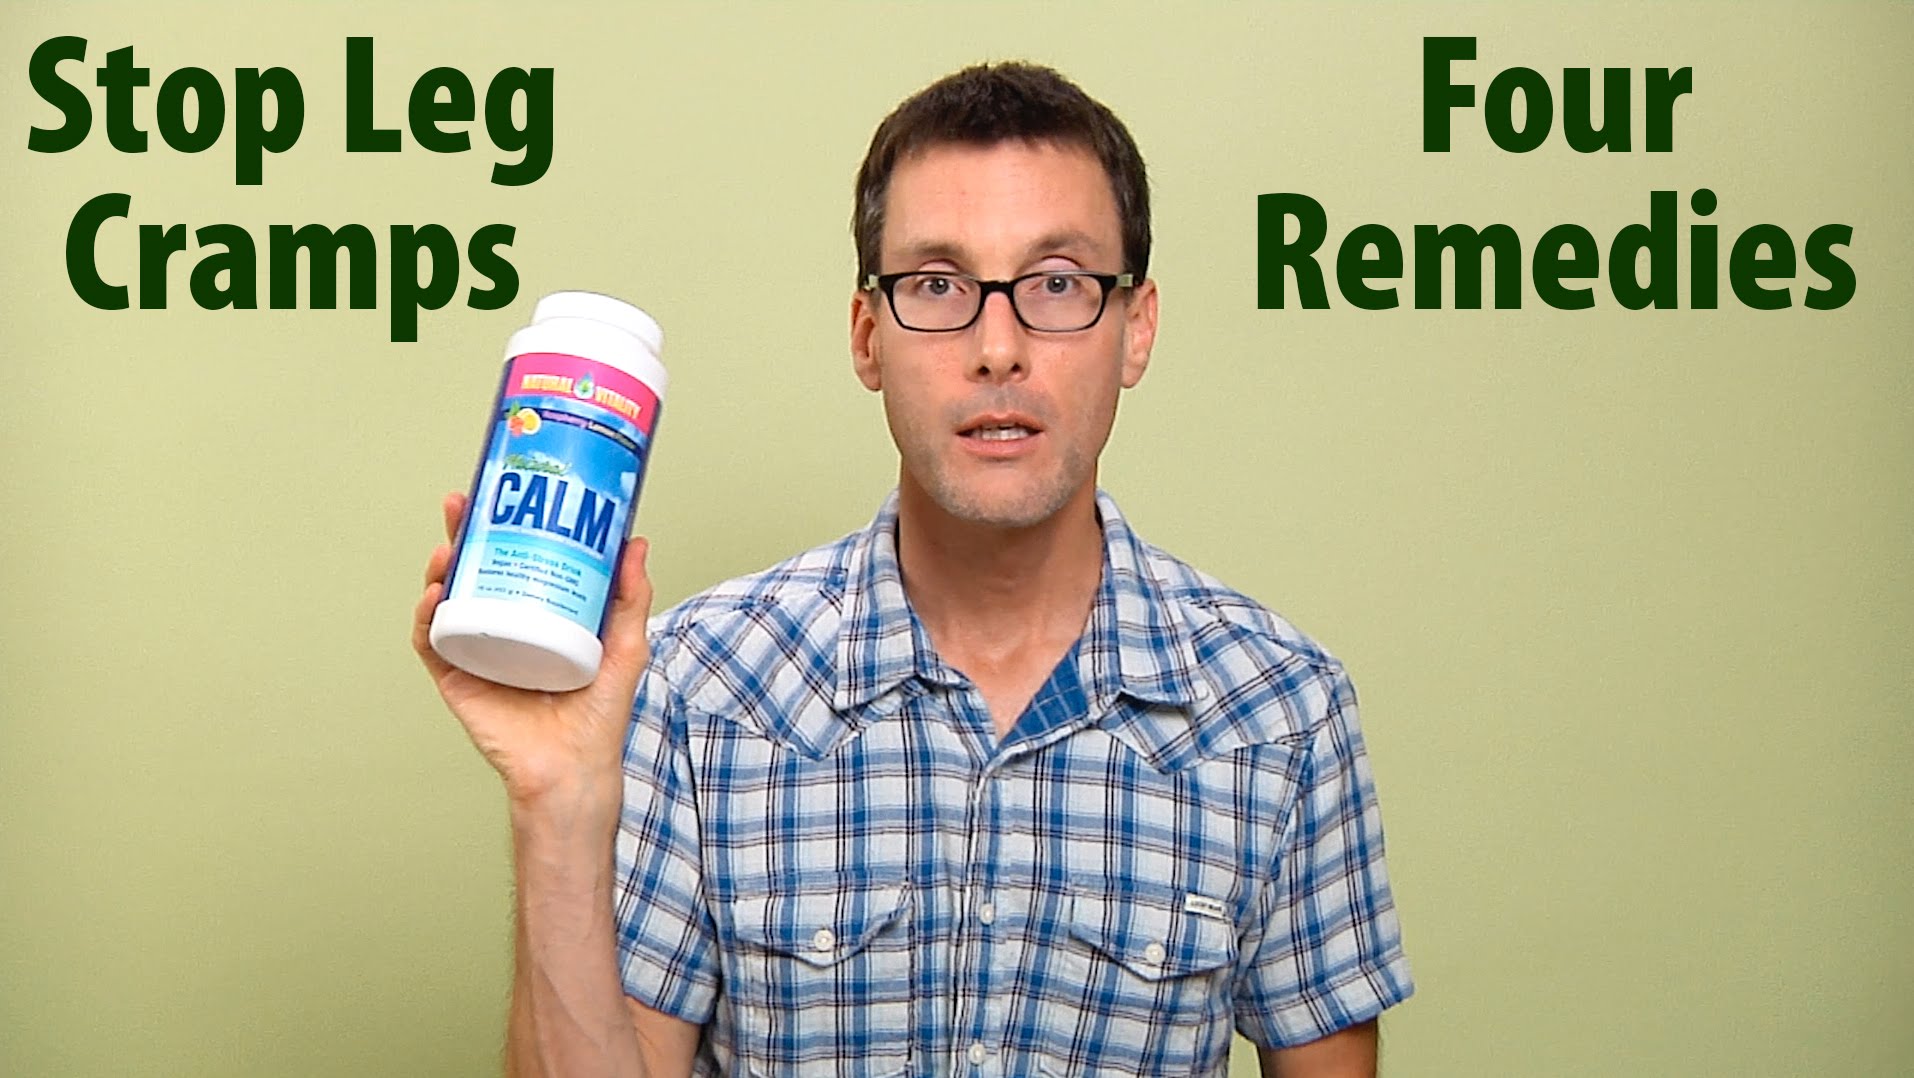 4 Ways To Quickly Stop Leg Cramps & Foot Cramps With Natural Remedies